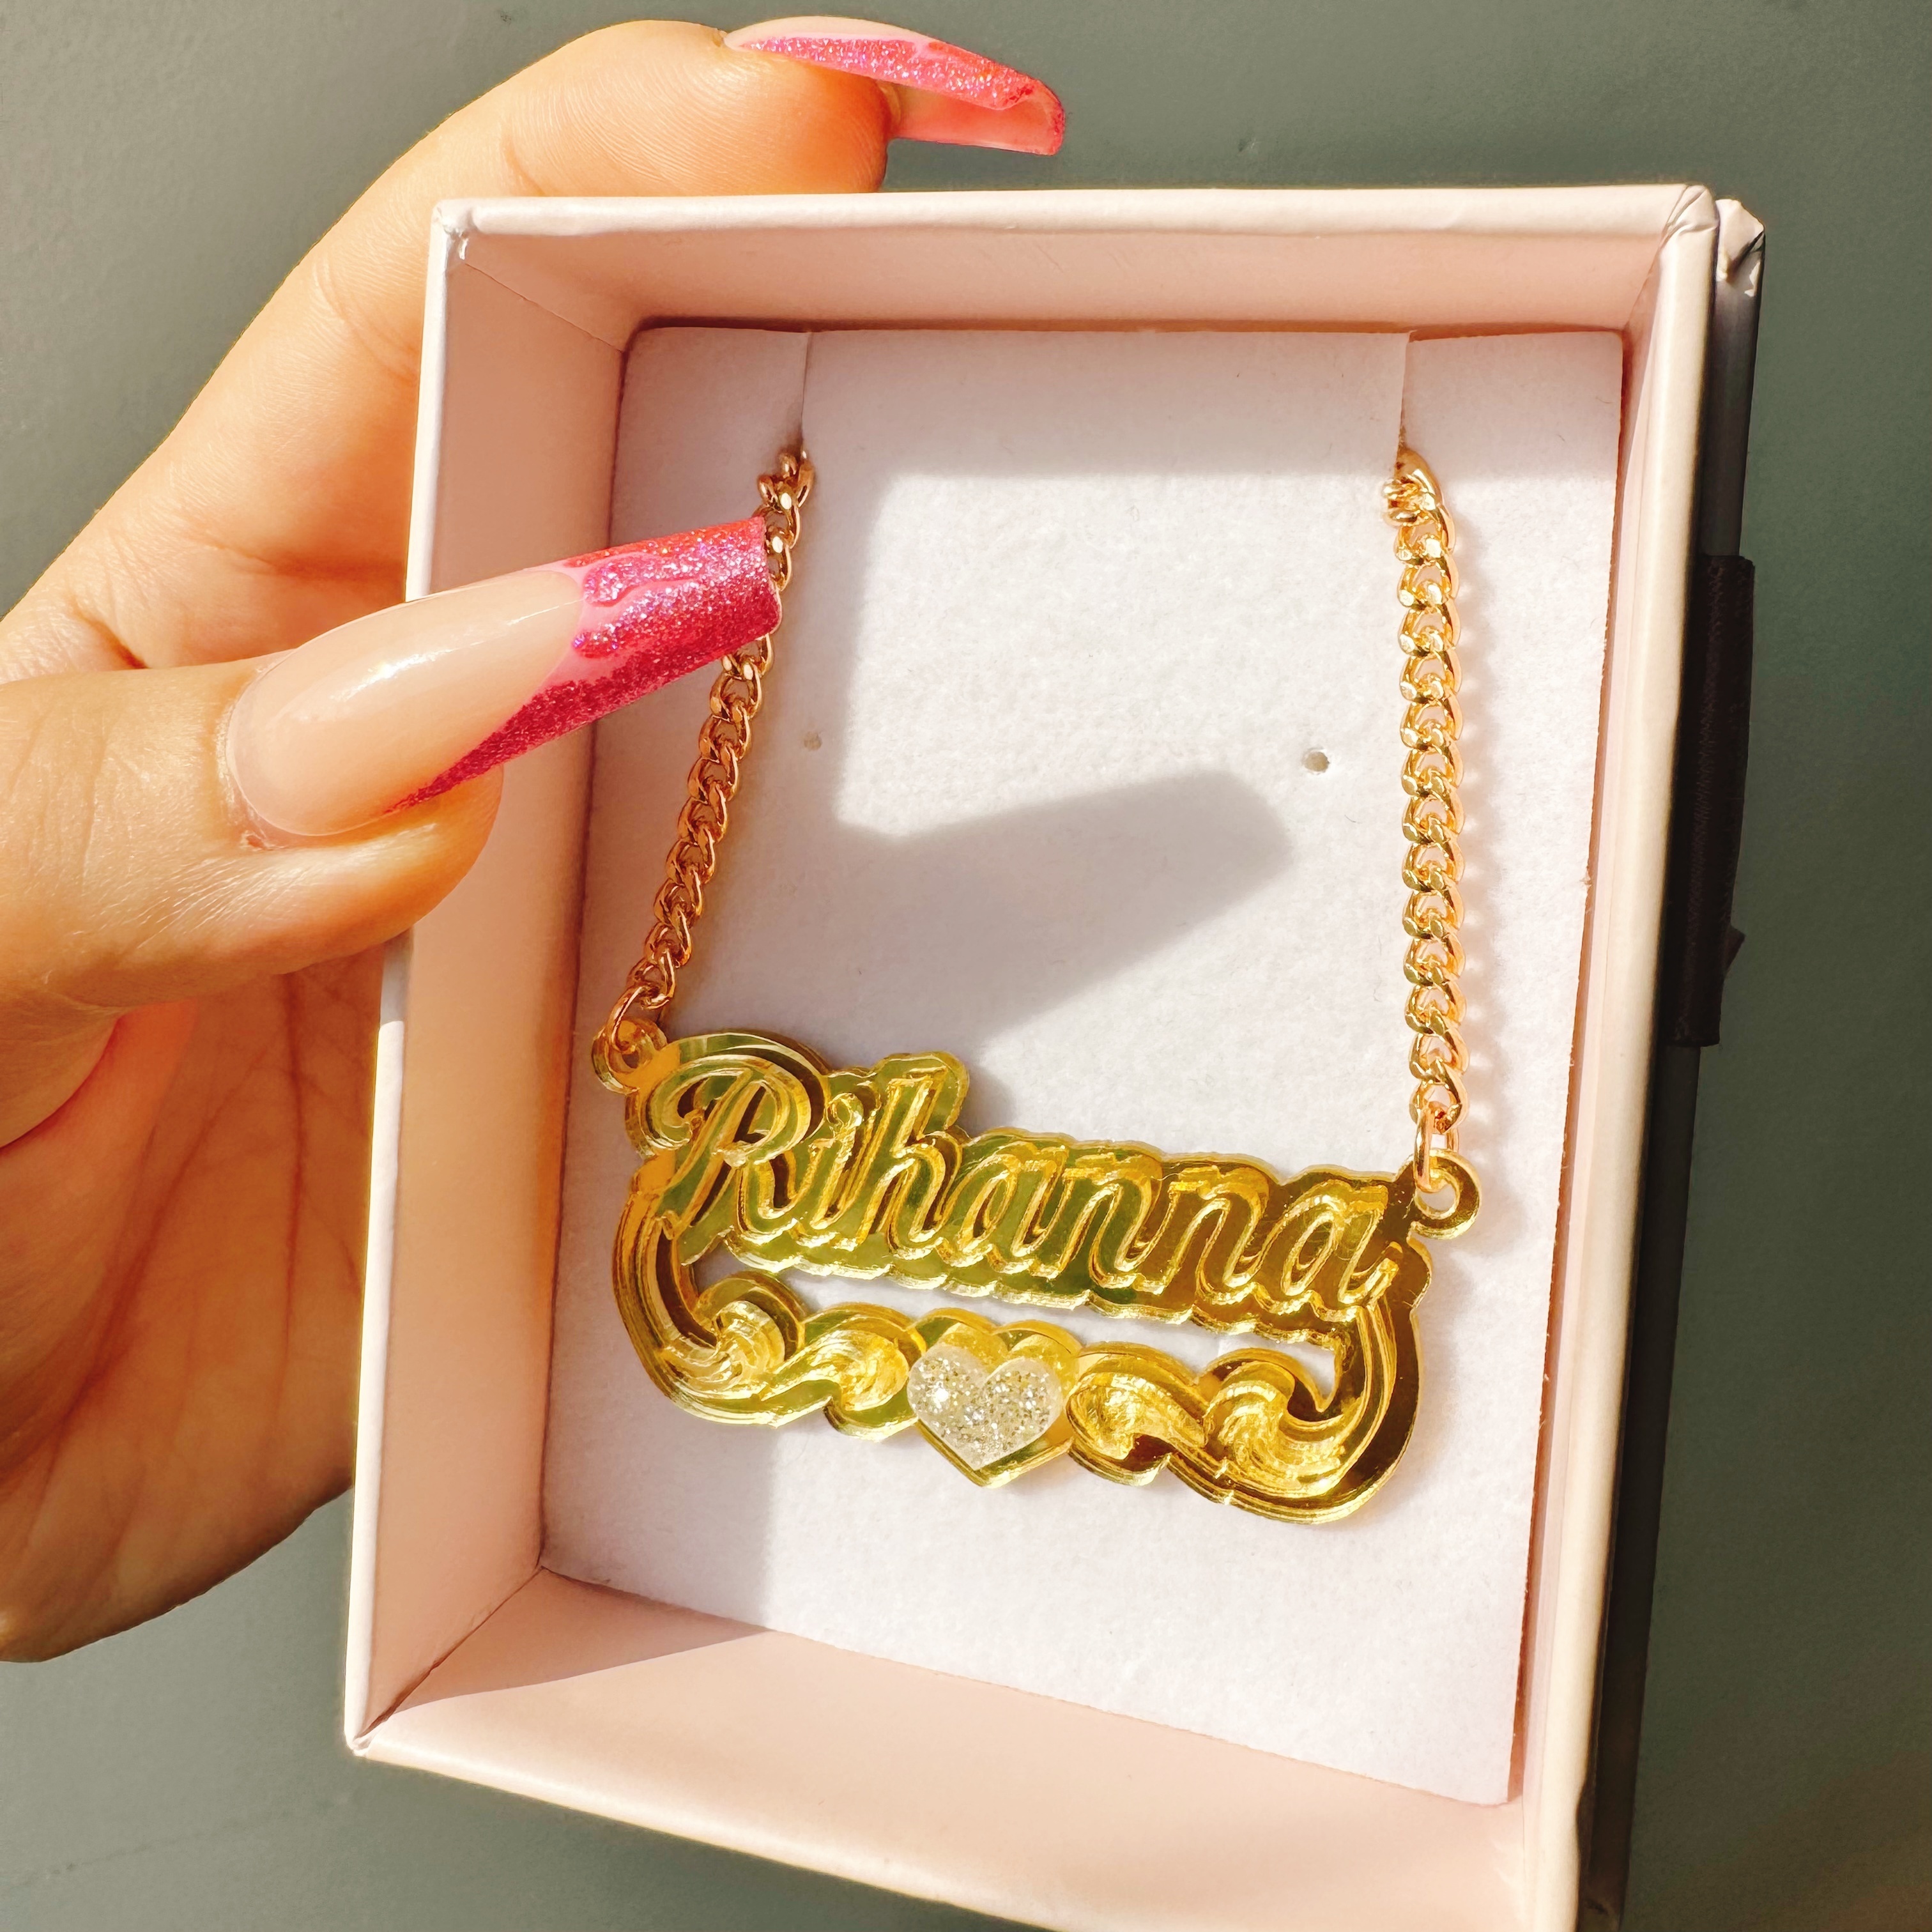 

Customized Acrylic Name Name Tag Pendant Necklace Mirror Golden Name Tag Necklace For Women Personalized Party Birthday Gift